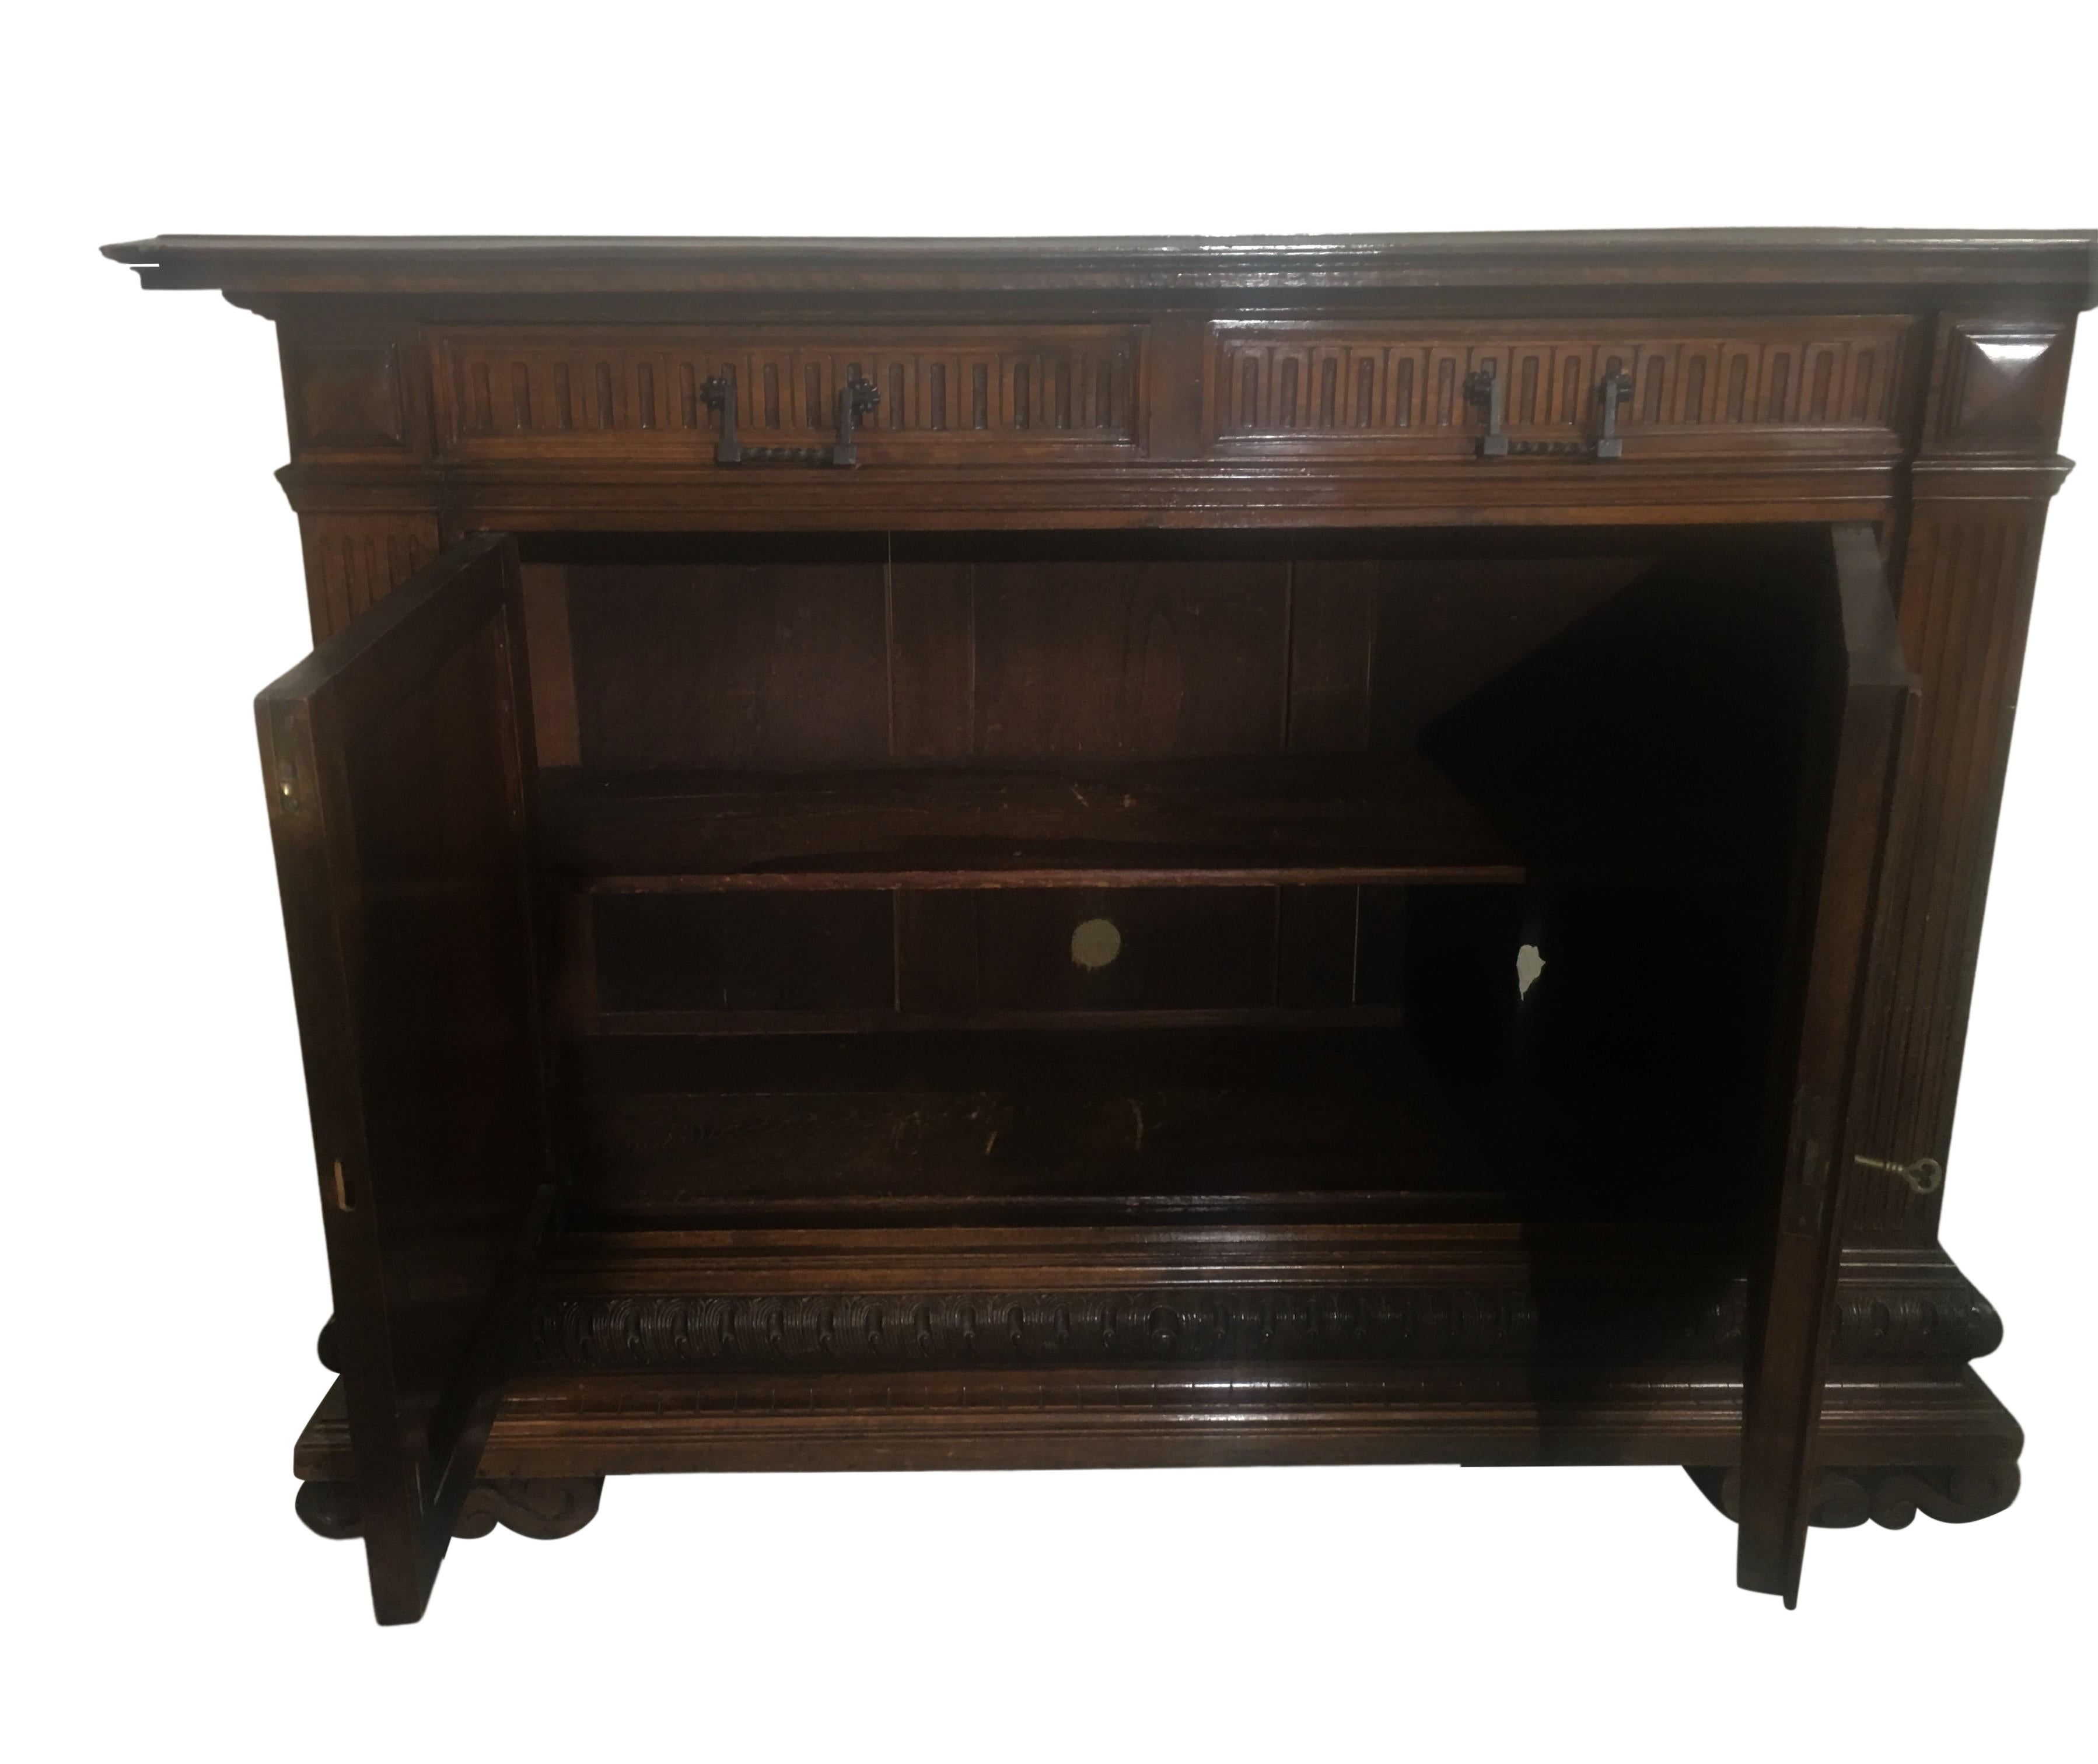 Early 19th century Italian buffett. The buffet has carvings has on the feet, bottom edge, and around the drawers. It has two drawers and two doors open up to a single shelf.